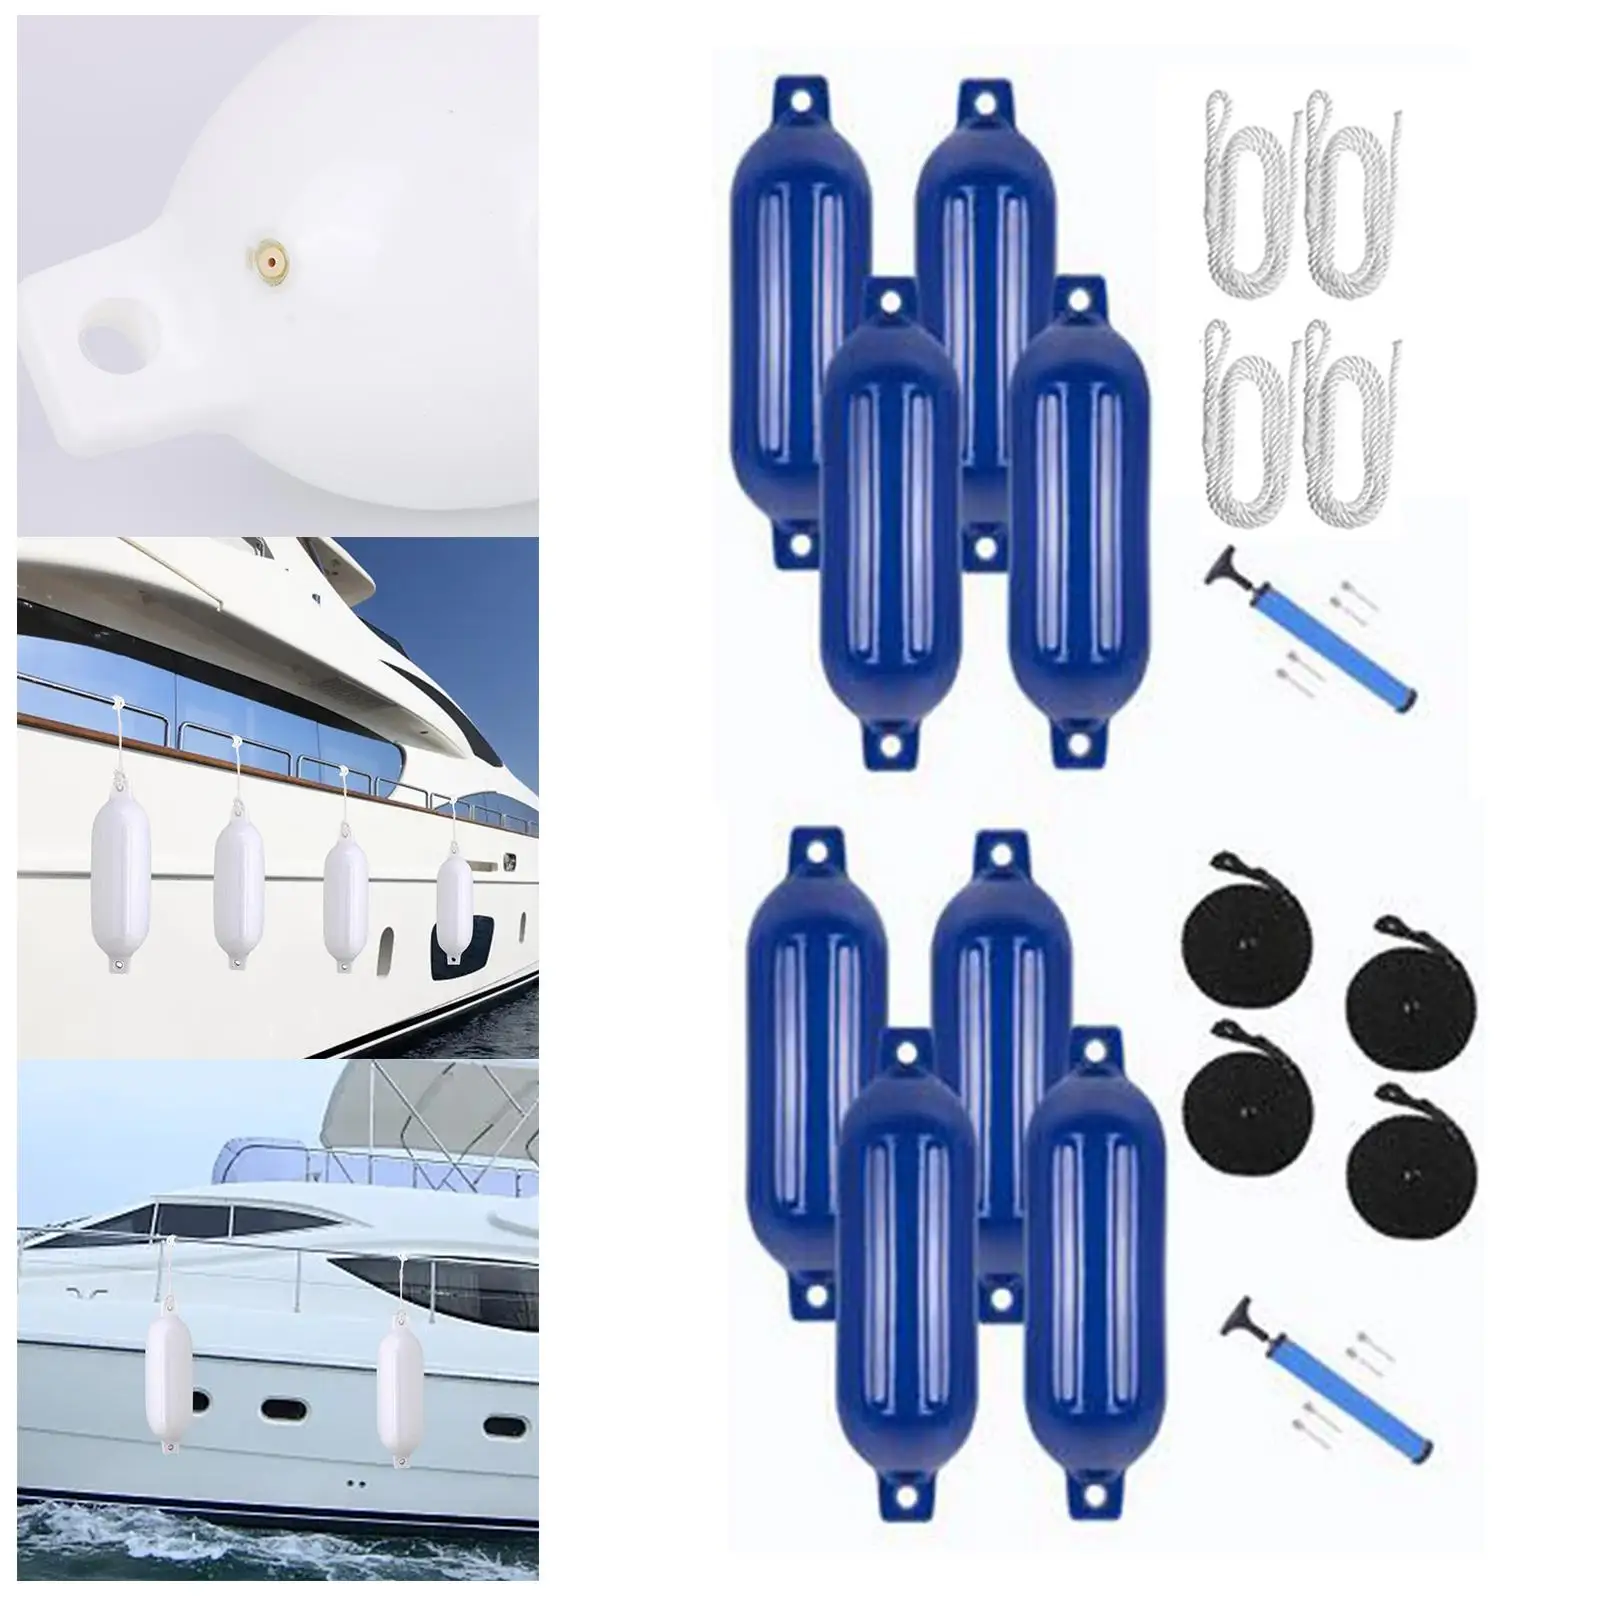 4x Marine Boat 1 Air Pump Accessory Boat Bumperss with 4 Ropes